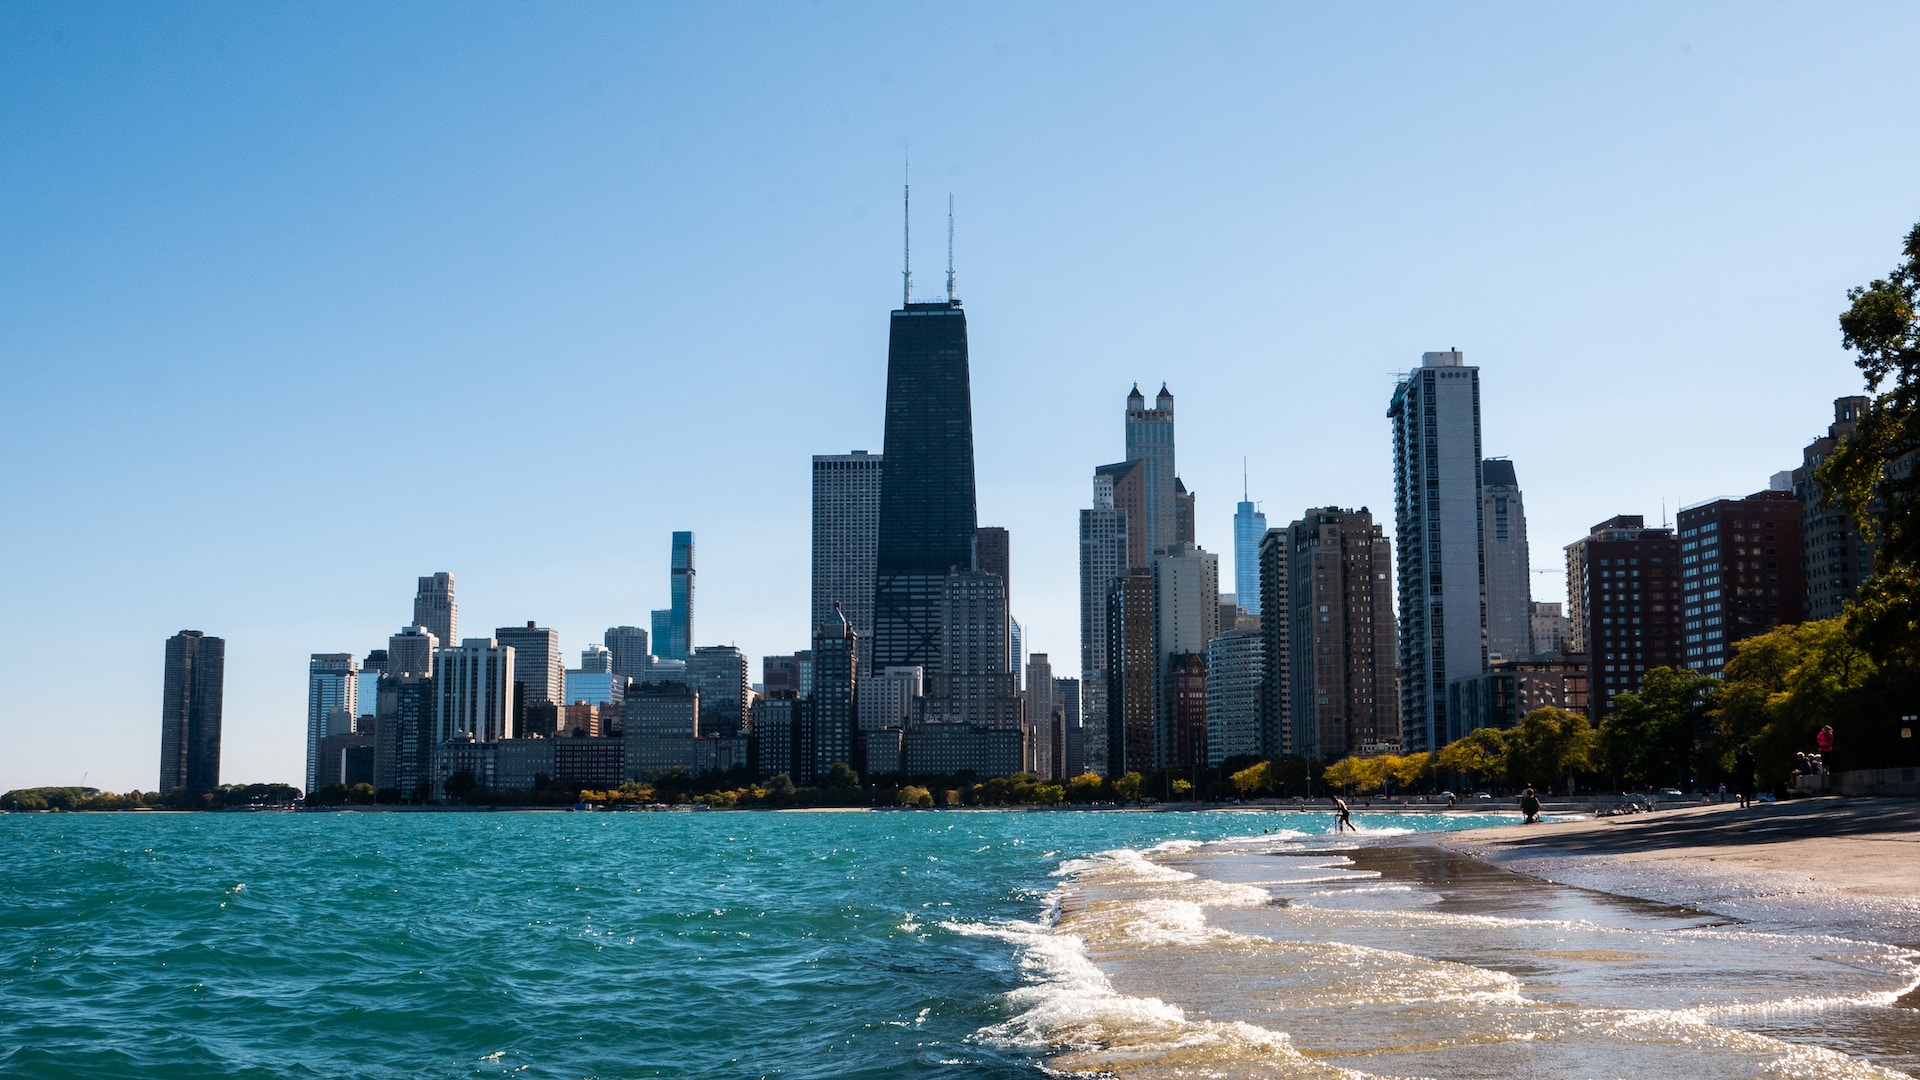 Chicago's skyline as seen from the beaches along Lake Michigan.